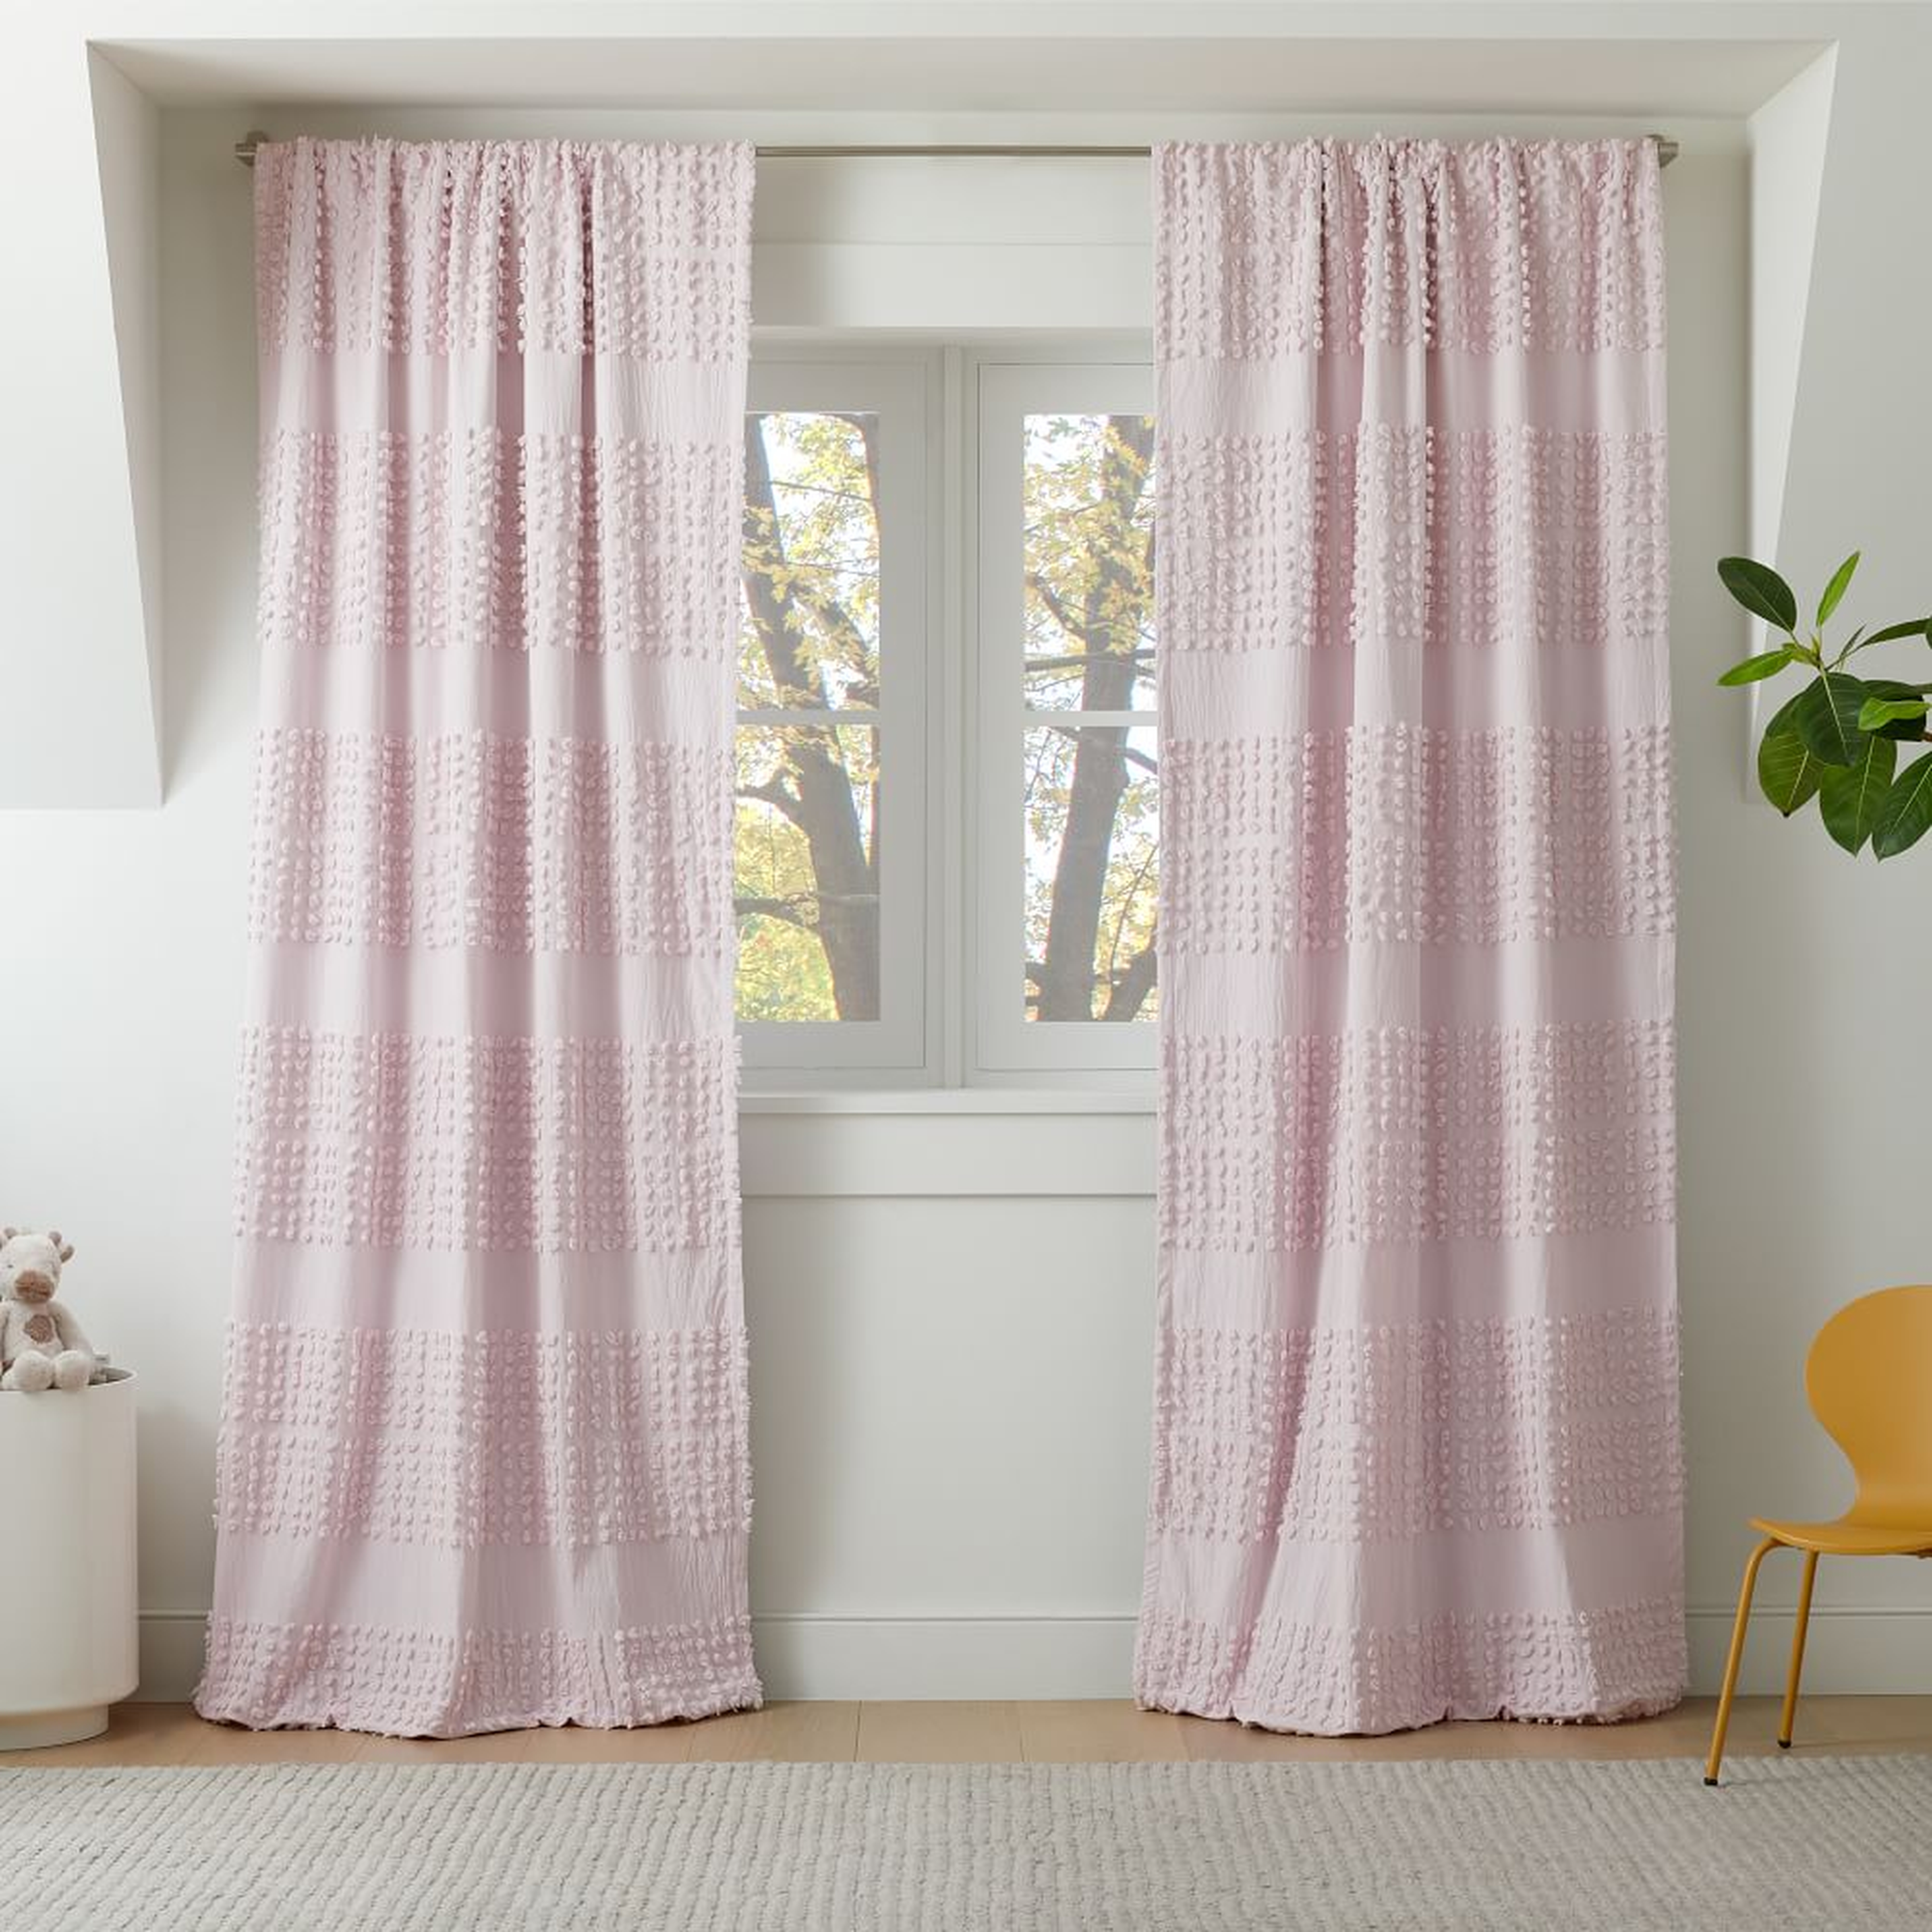 Candlewick Blackout Curtain Panel, 48X108, Perfect Pink, WE Kids - West Elm